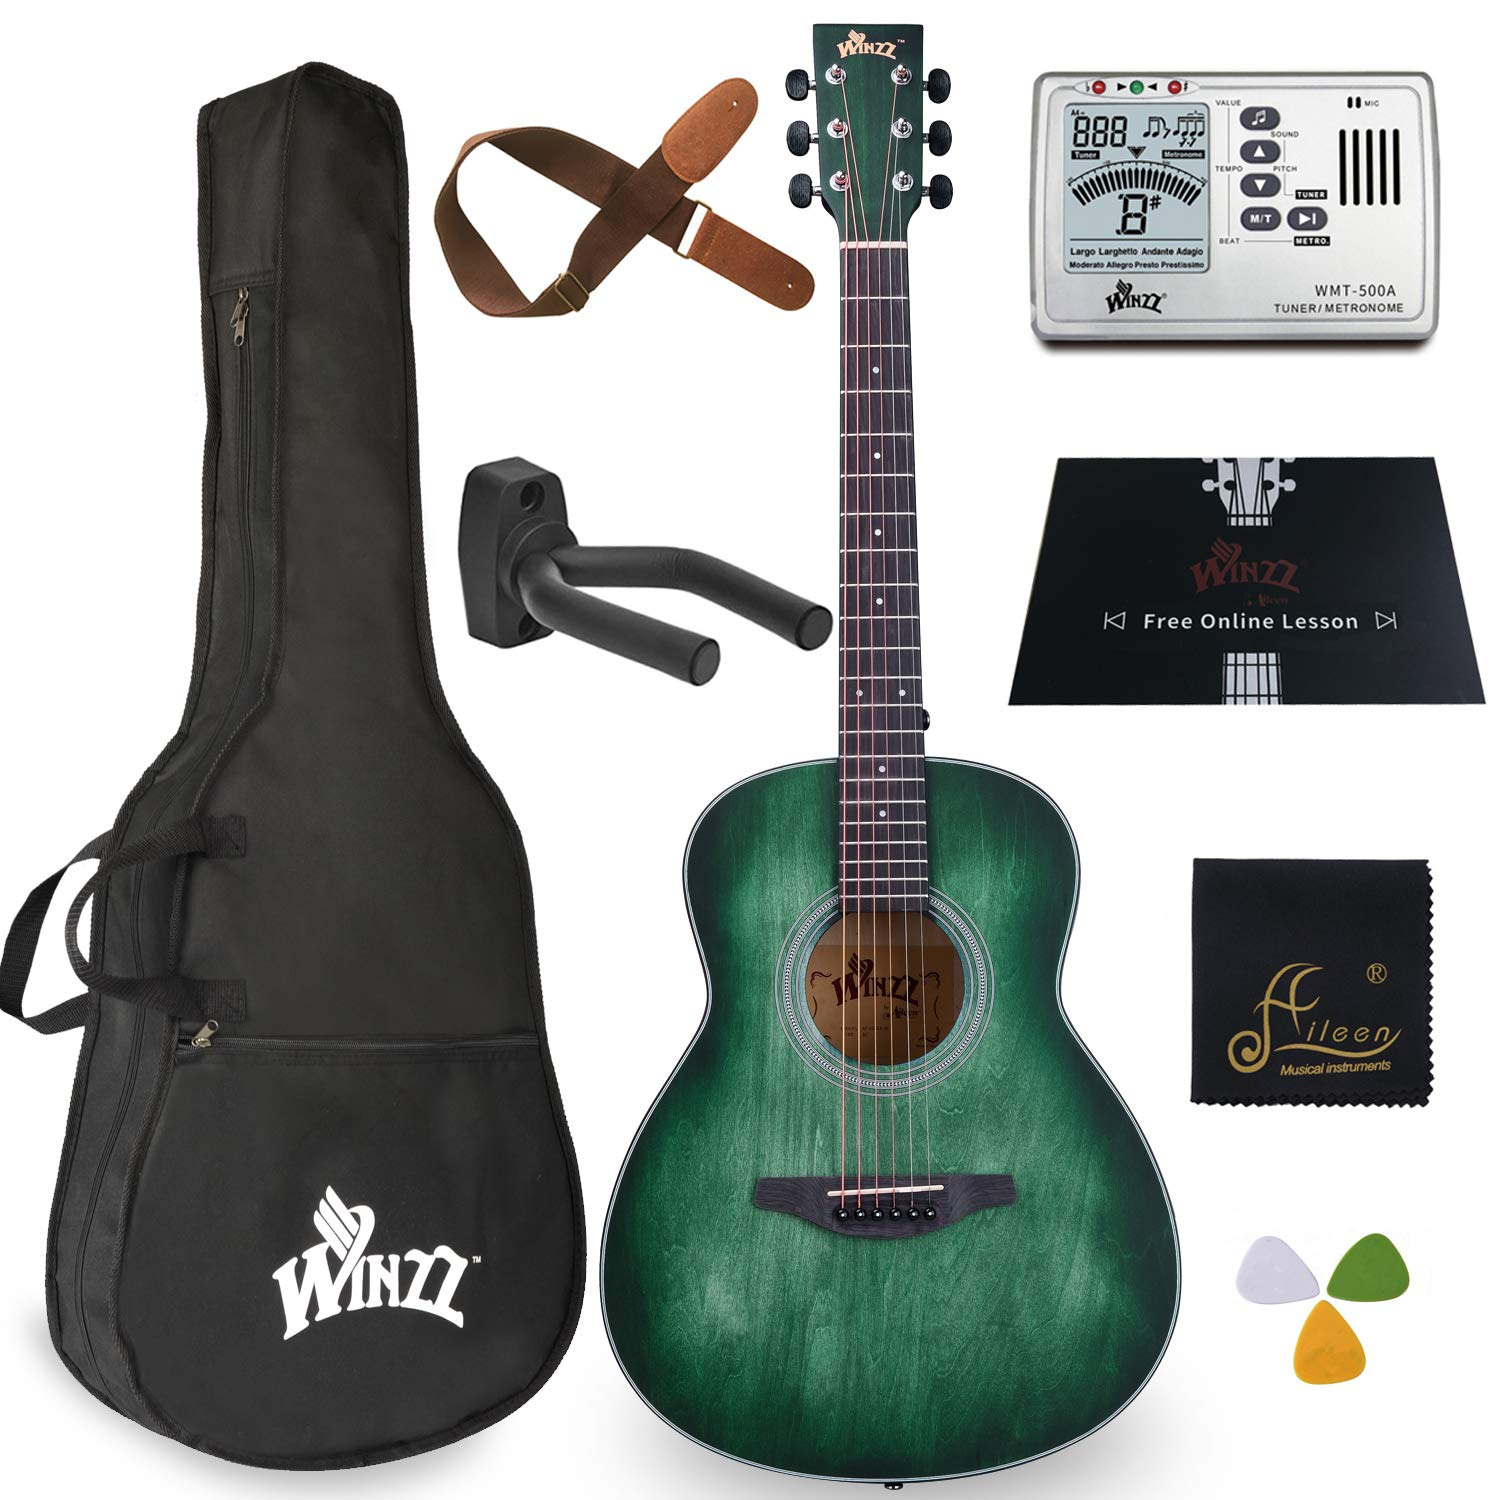 WINZZ 3/4 Dreadnought Acoustic Guitar Bundle with Online Lessons, Bag, Metronome Tuner, Wall-mounted Hanger, Strap, Picks & Cleaning Cloth,36 Inches Right Handed, Dark Hunter Green 8